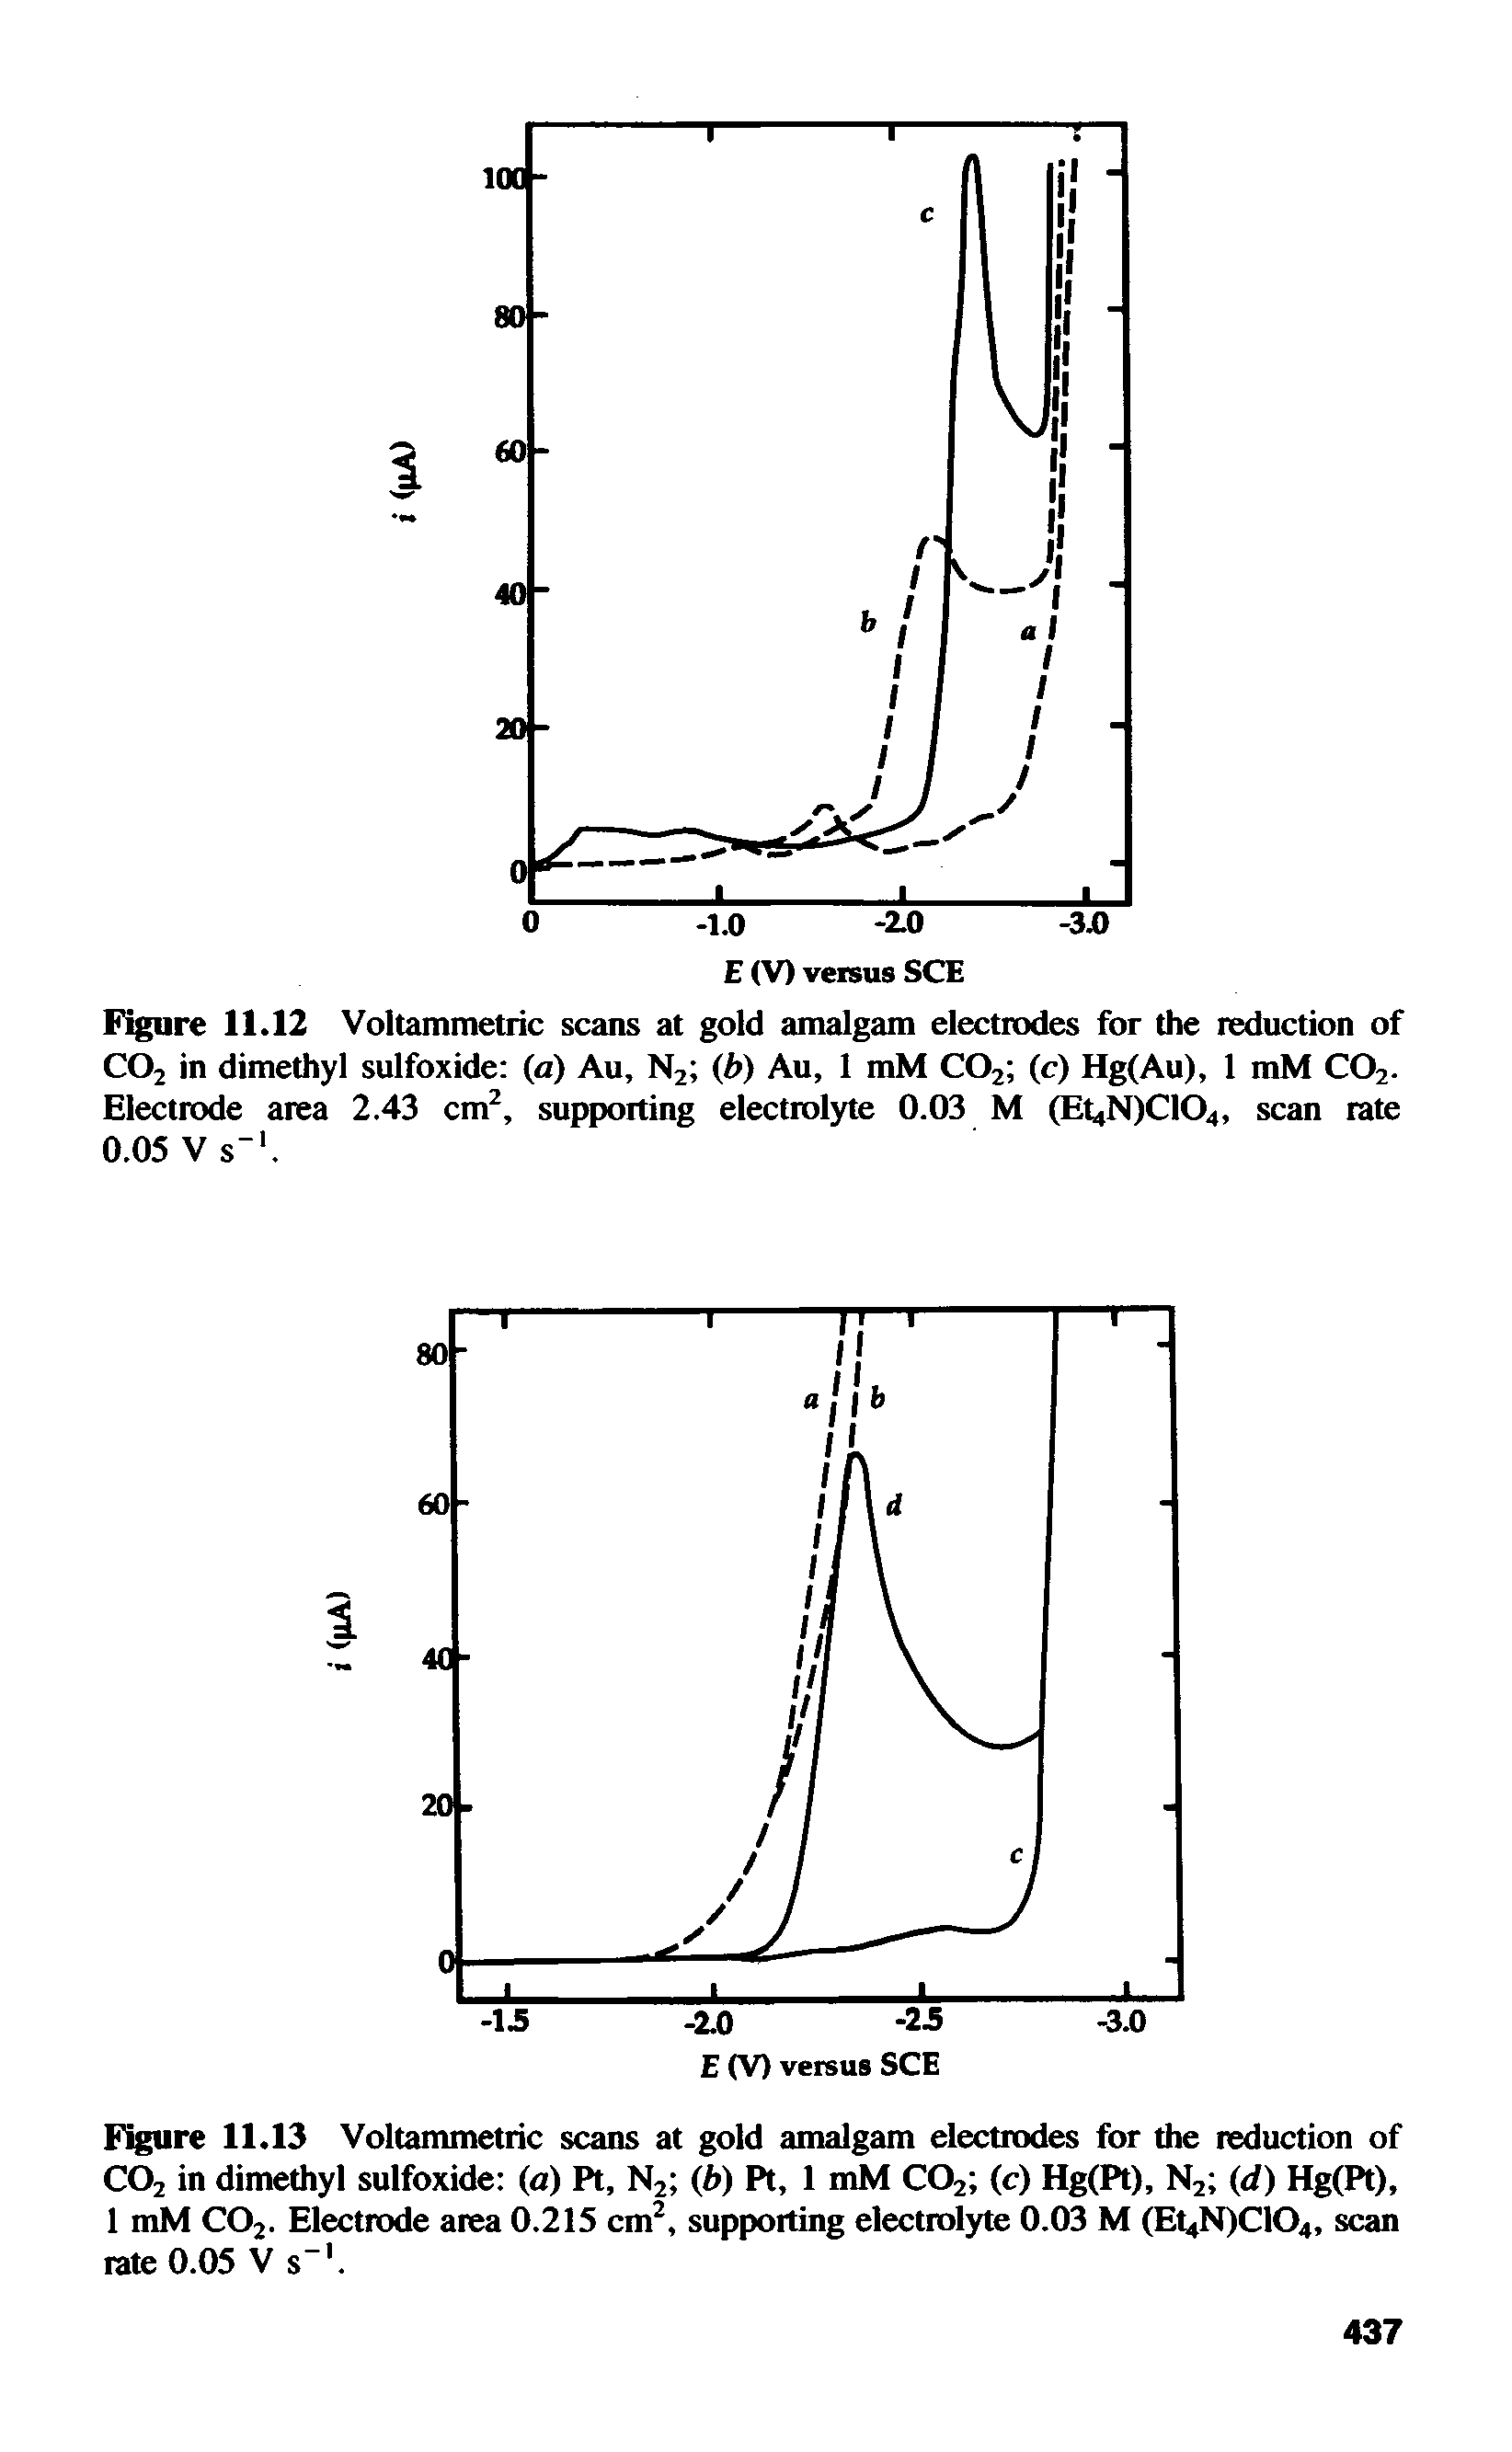 Figure 11.13 Voltammetric scans at gold amalgam electrodes for the reduction of C02 in dimethyl sulfoxide (a) Pt, N2 (b) Pt, 1 mM C02 (c) Hg(Pt), N2 (d) Hg(Pt), 1 mM C02. Electrode area 0.215 cm2, supporting electrolyte 0.03 M (Et4N)C104, scan rate 0.05 V s 1.